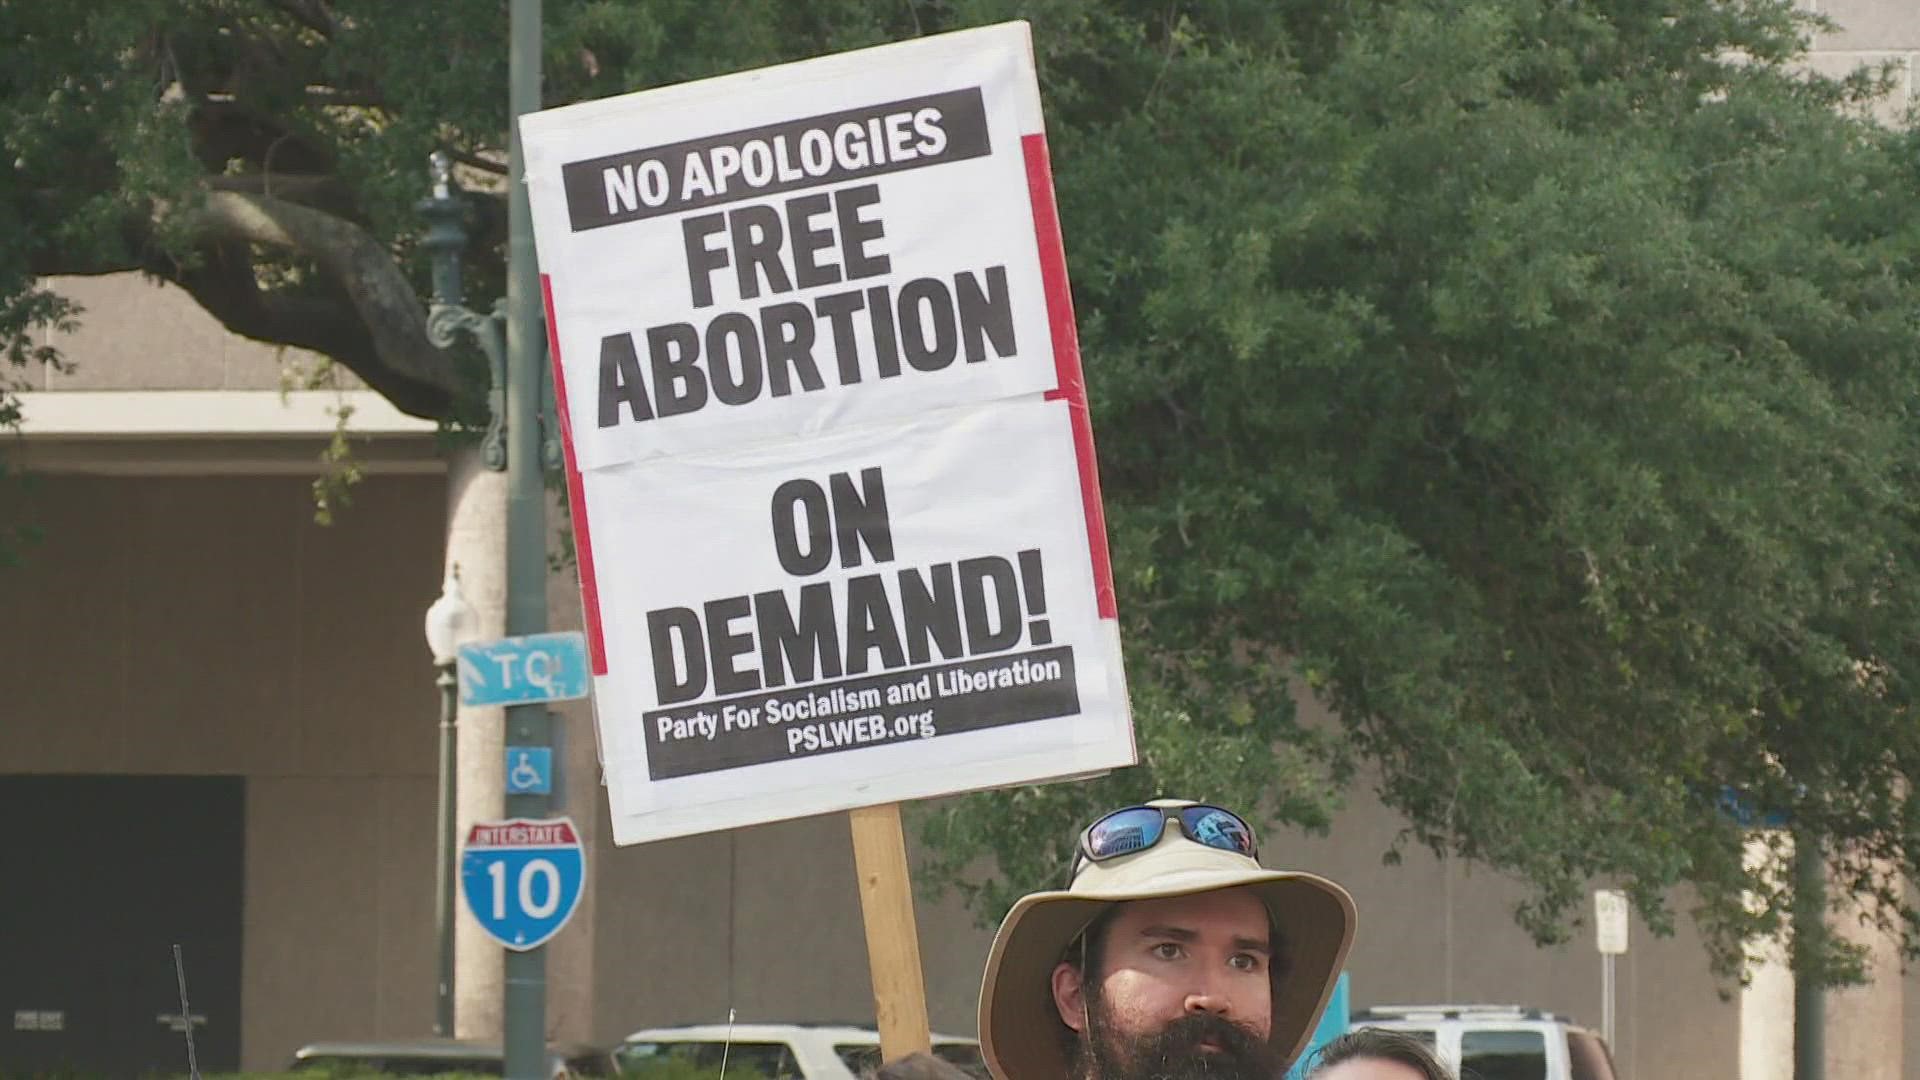 The rally comes after a draft opinion leaked from the Supreme Court, indicating an overturn of Roe v Wade, ending federally protected right.